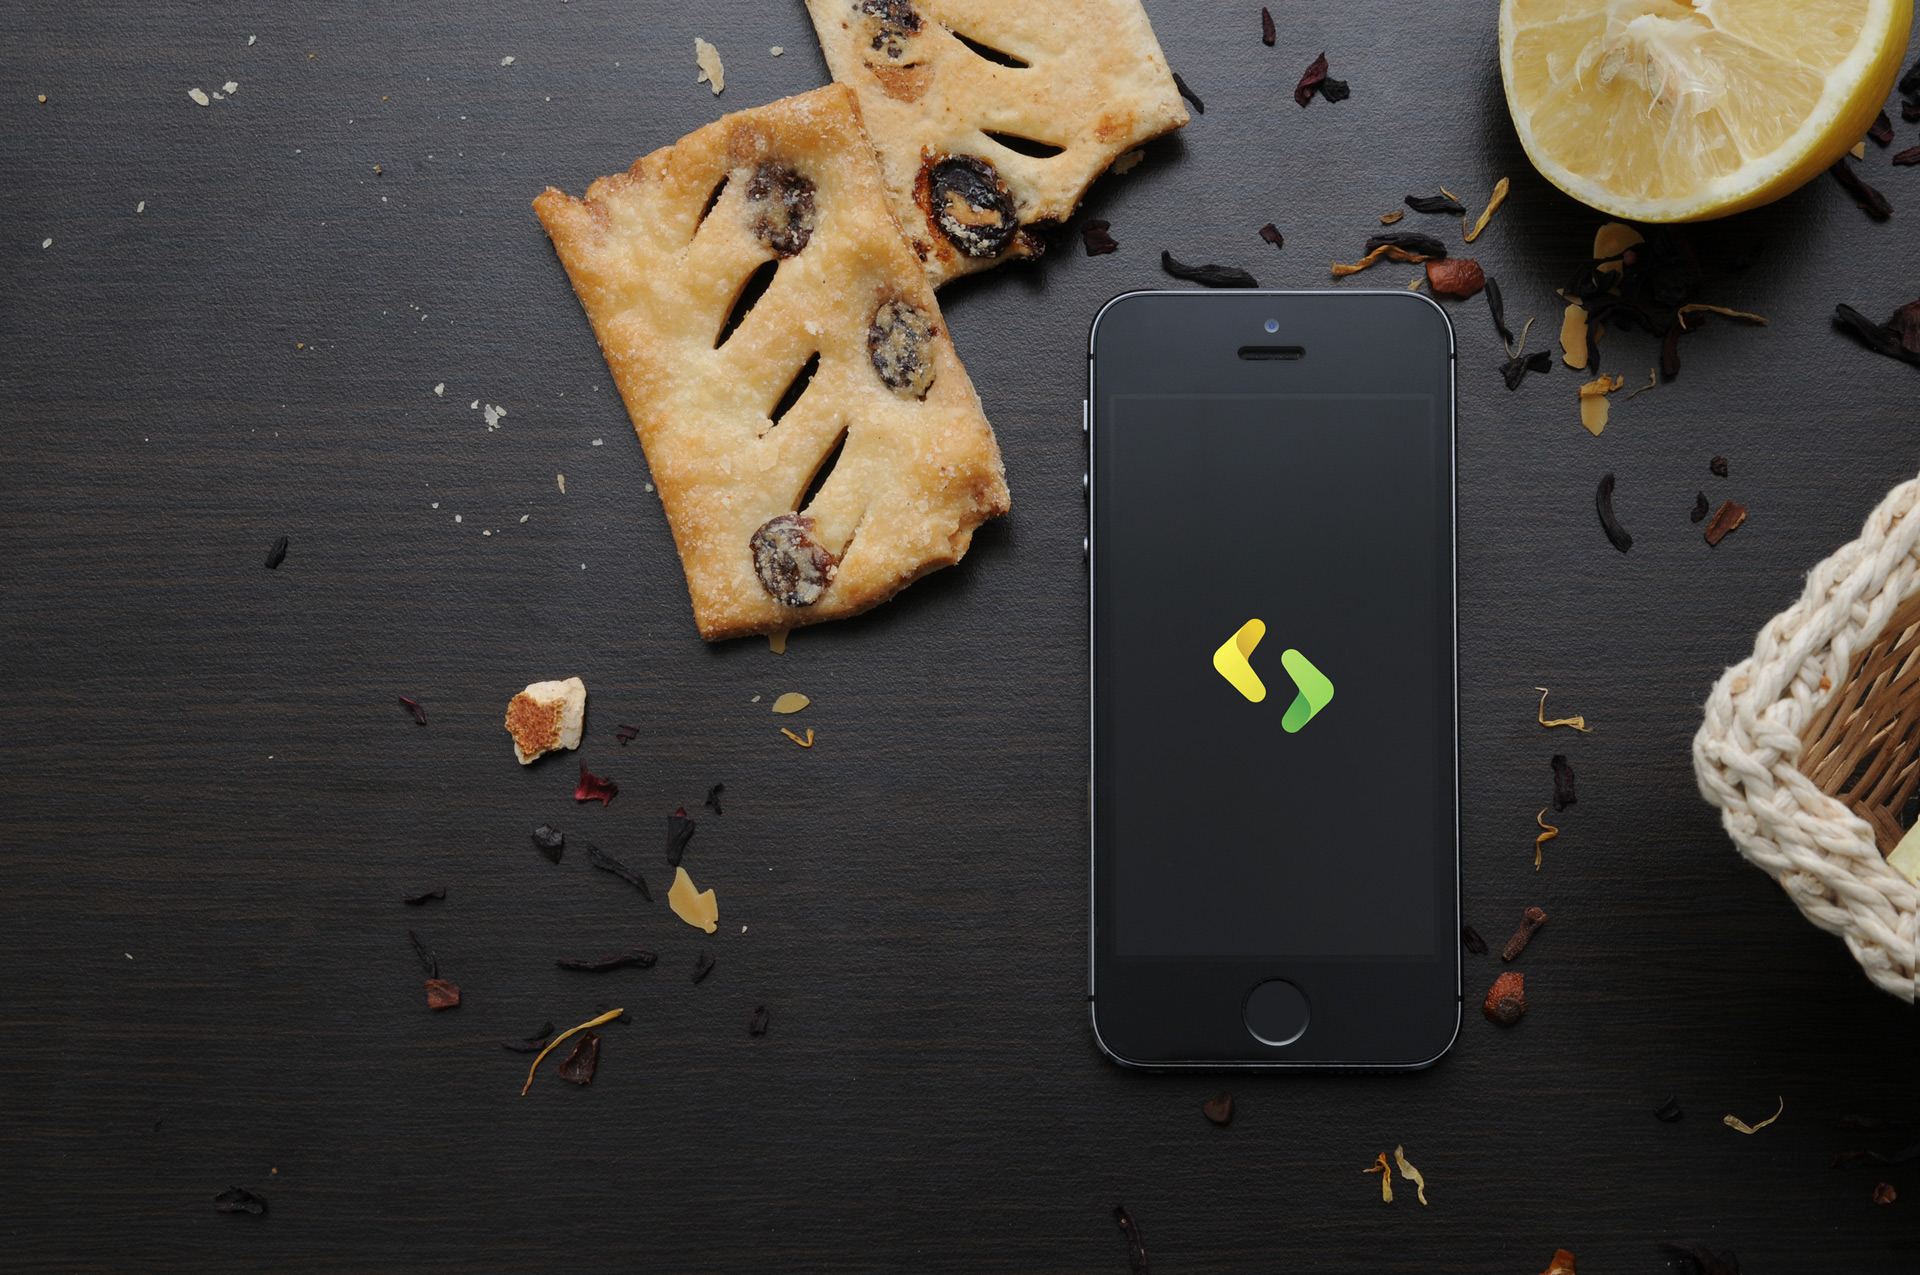 mokcup psd iPhone 5 with lemon and cookies